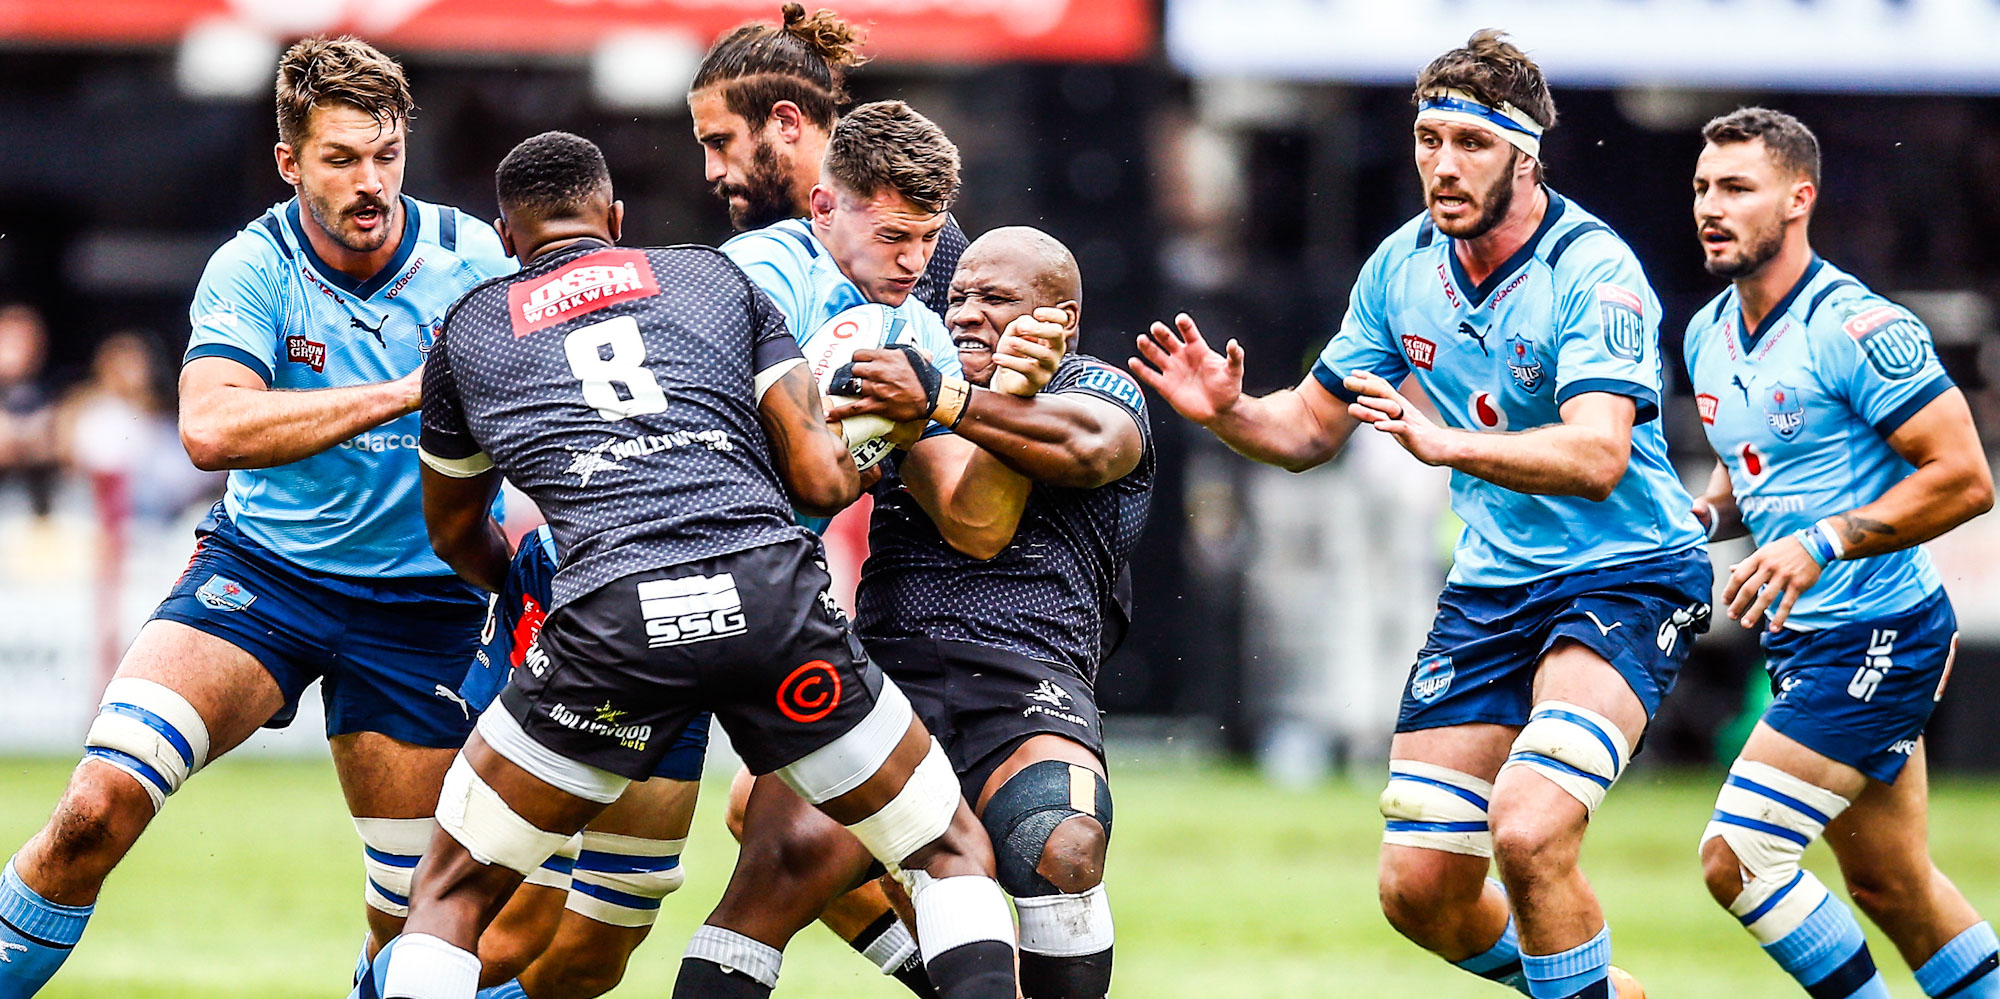 The Vodacom Bulls and Cell C Sharks in action earlier this season.